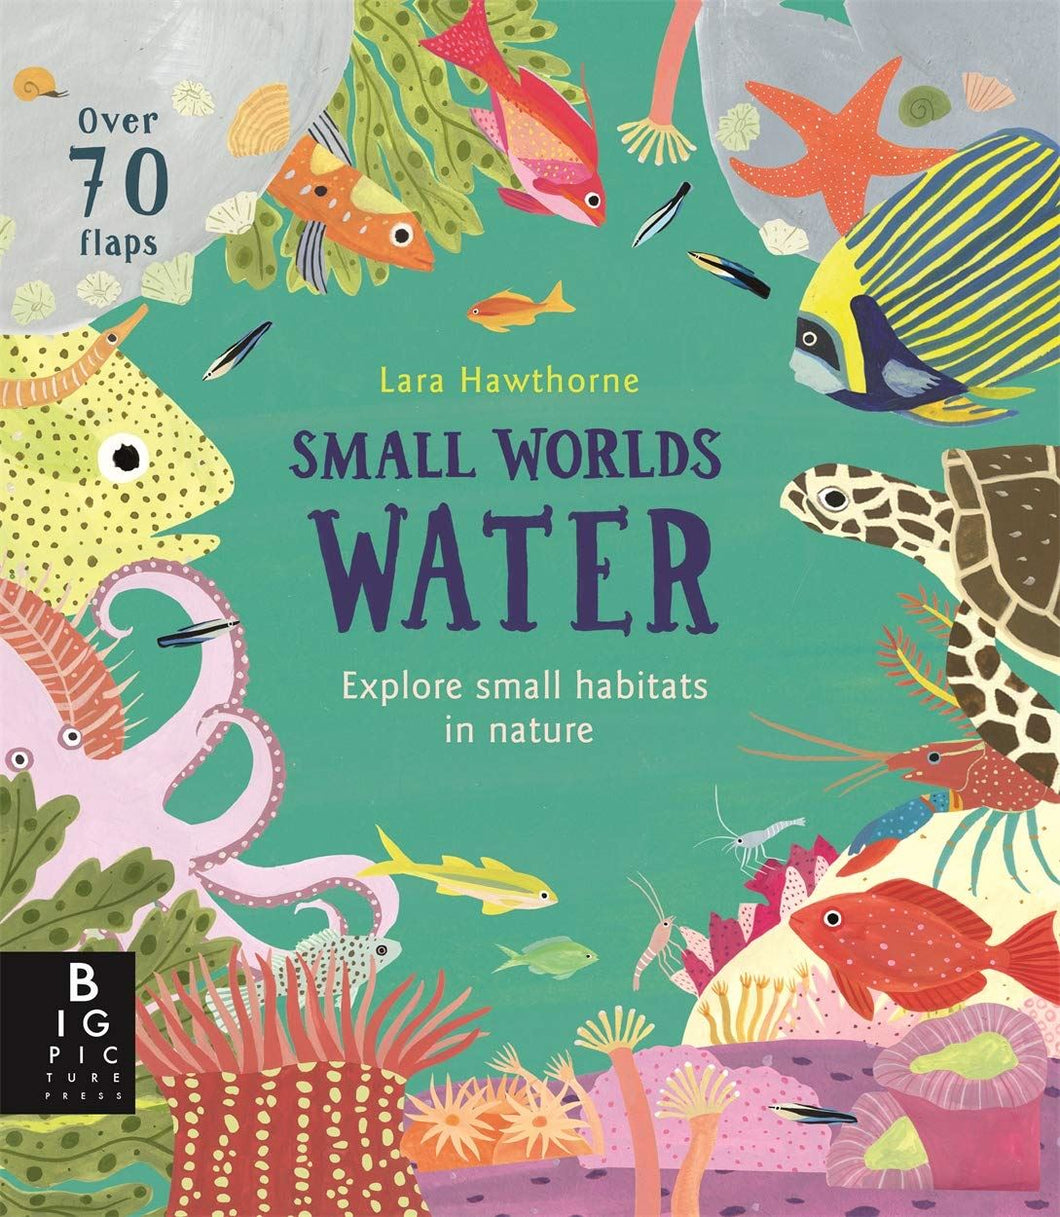 Small Worlds: Water by Lily Murray & Lara Hawthorne